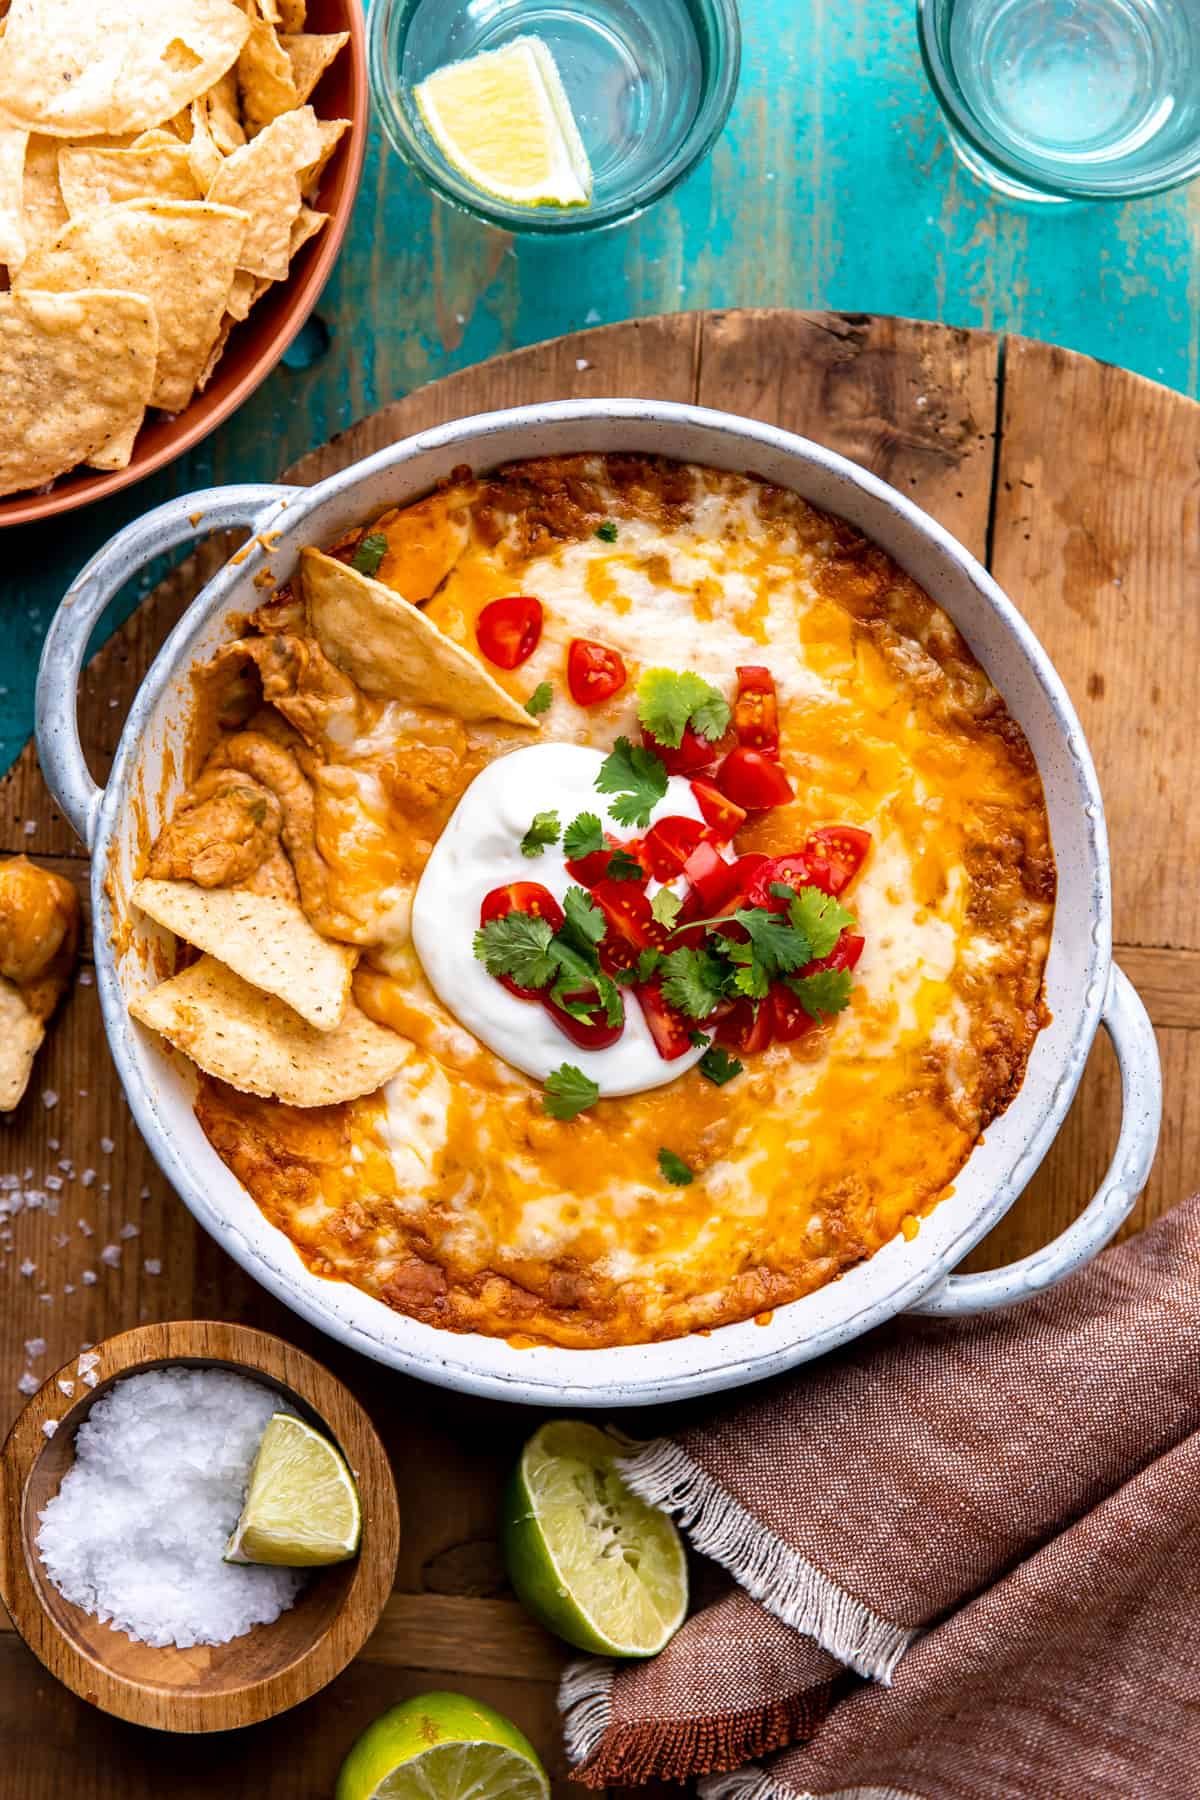 Dish filled with creamy bean dip covered with melted cheese.